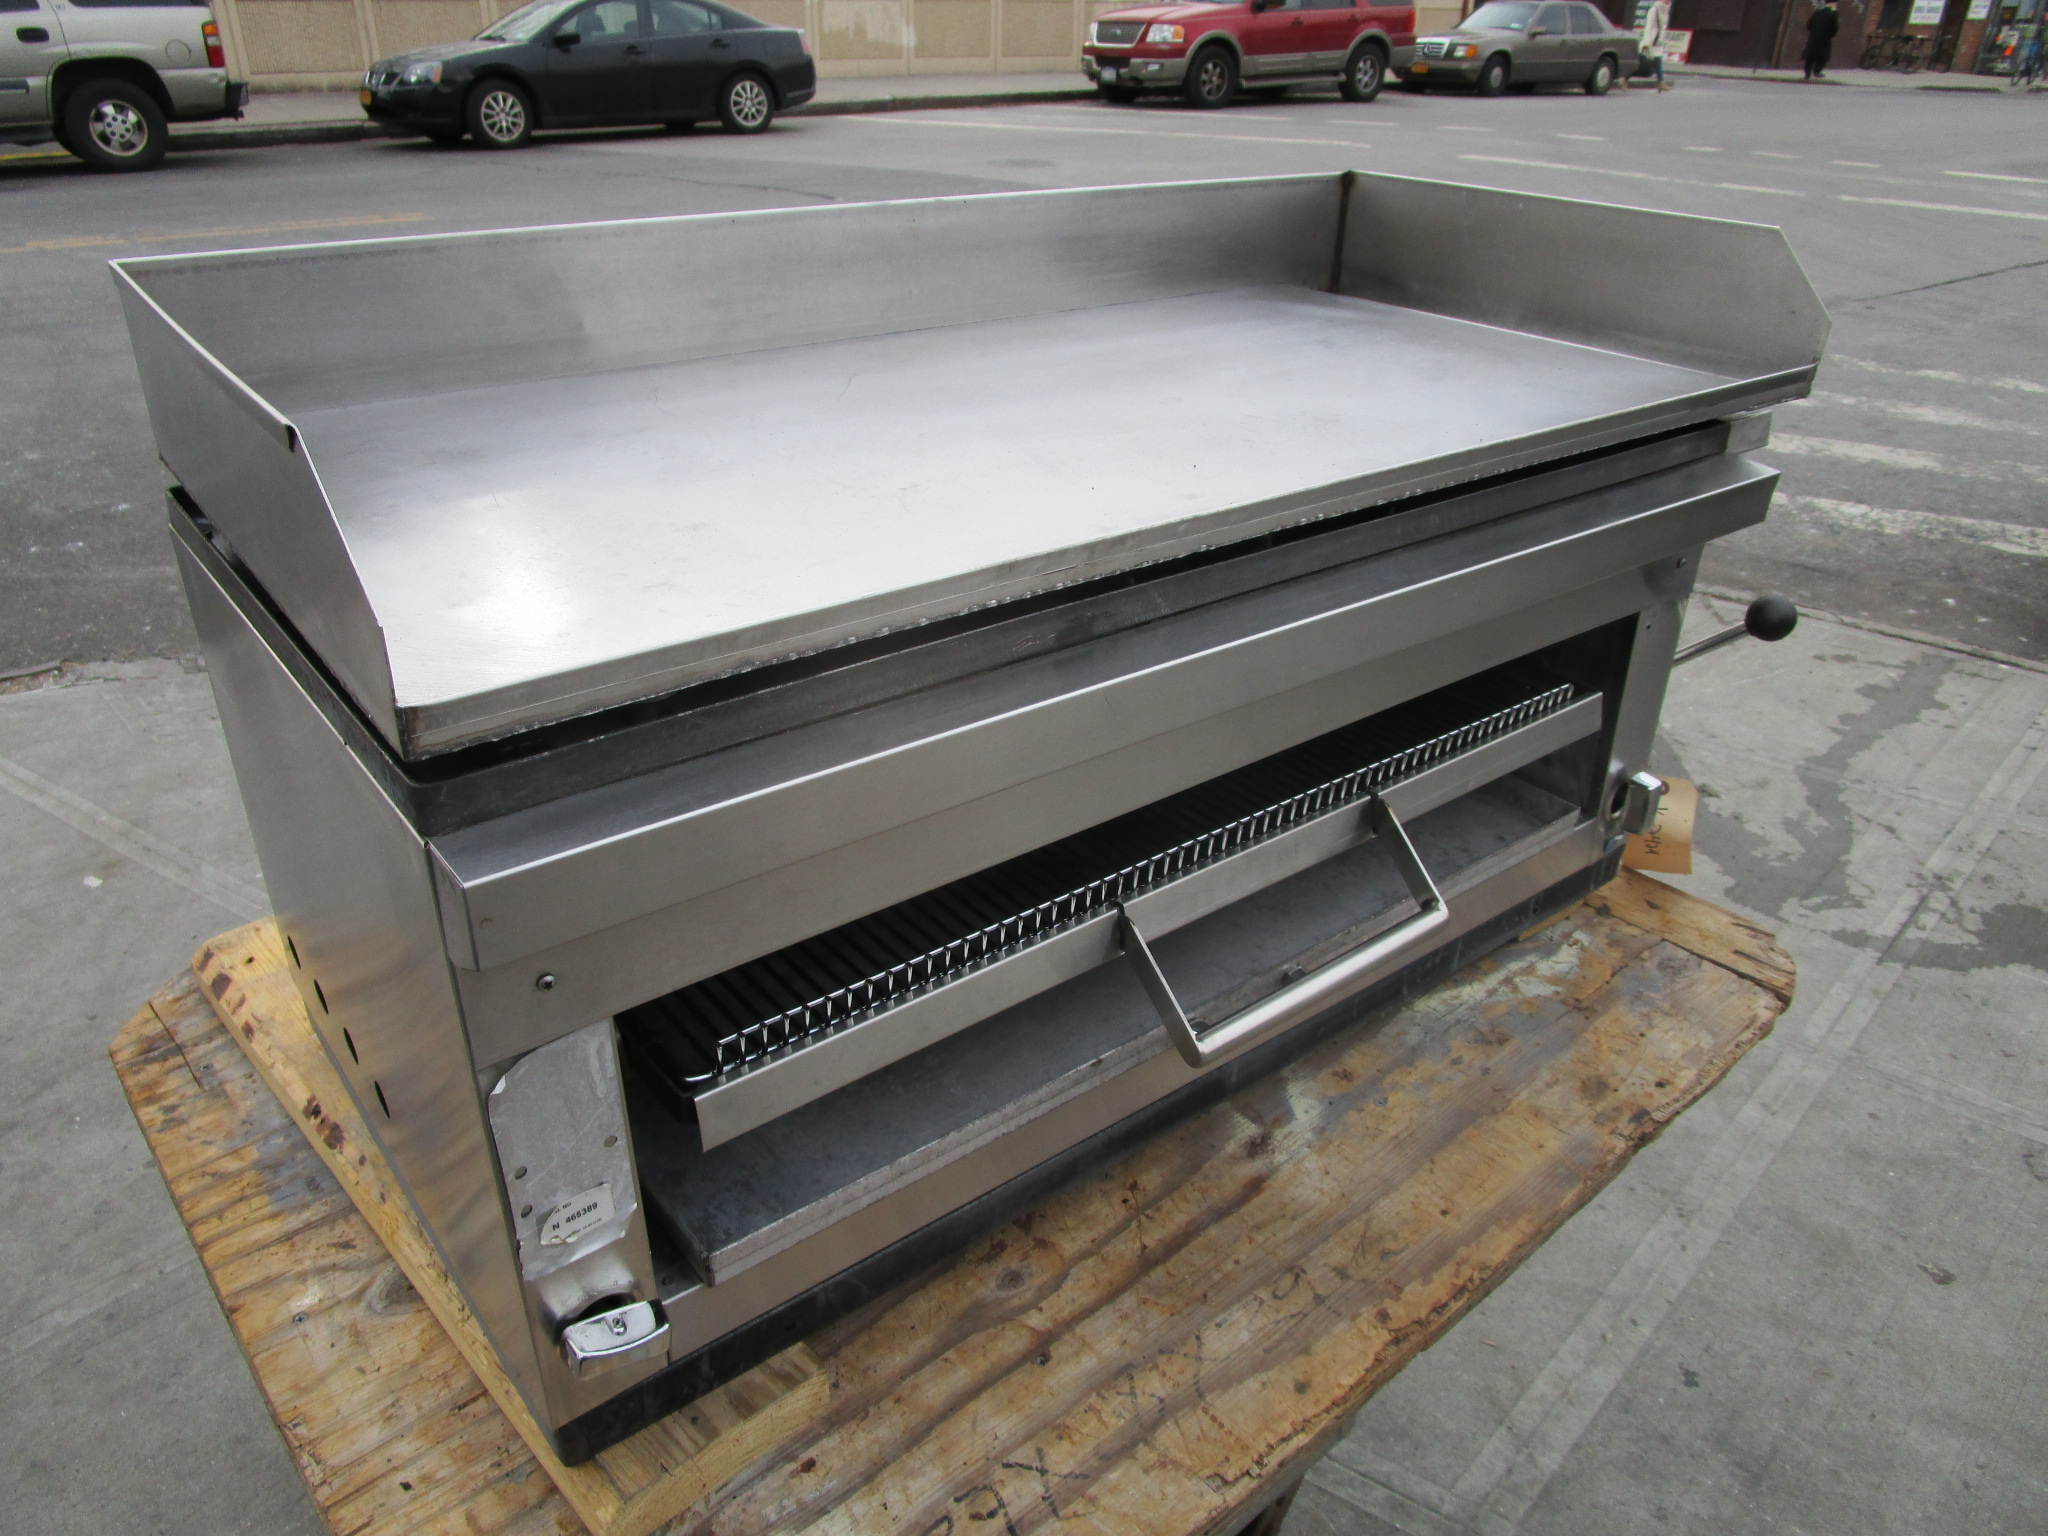 Grindmaster-Cecilware Gas Griddle / CheeseMelter HDB2042, Used